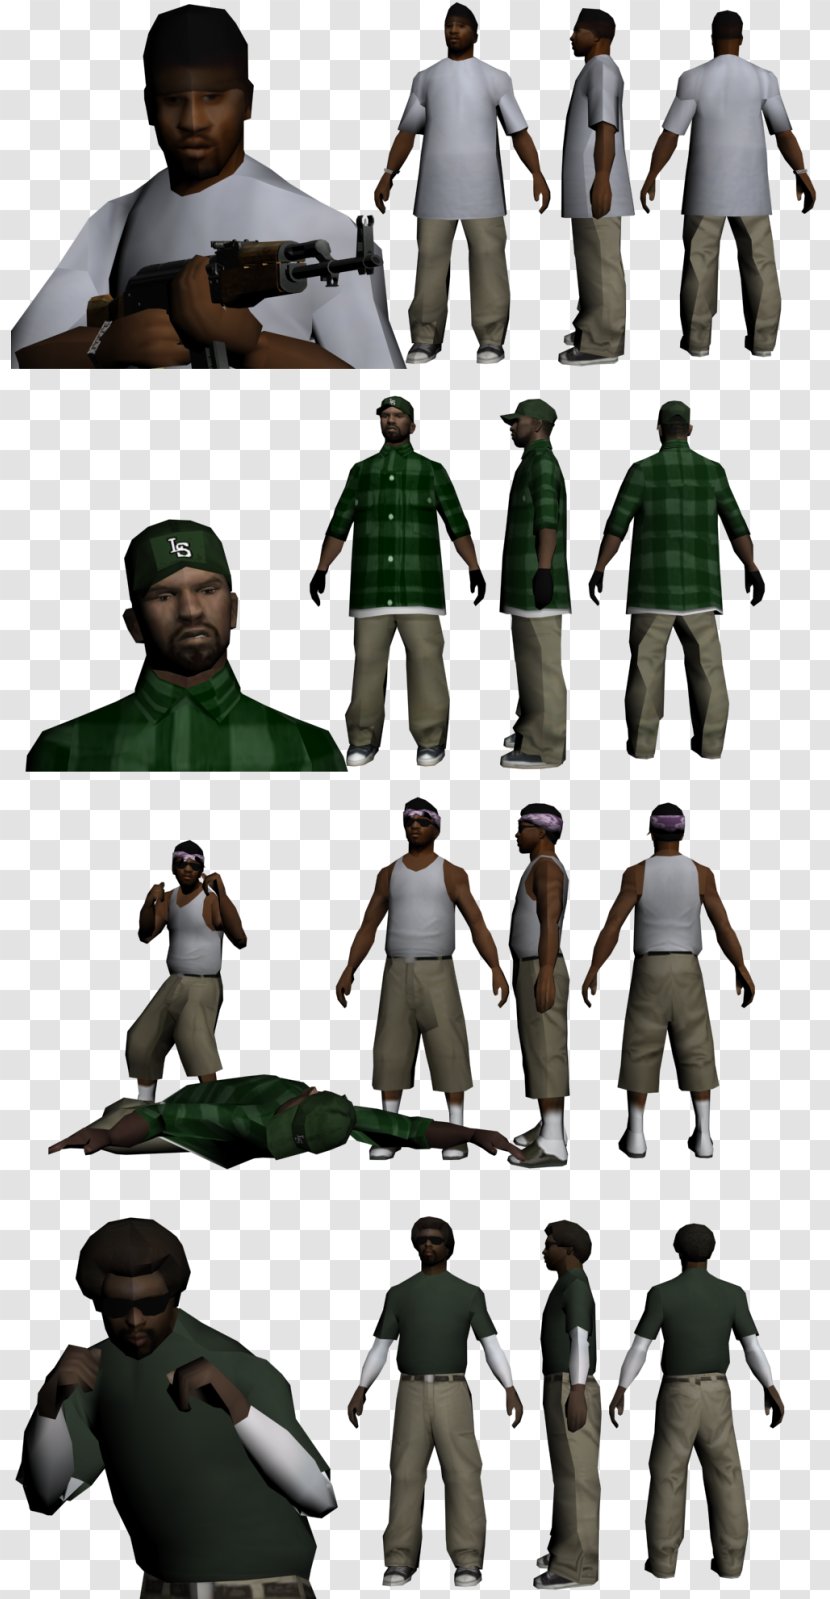 TinyPic Crips Mod Character African American - Costume Design Transparent PNG